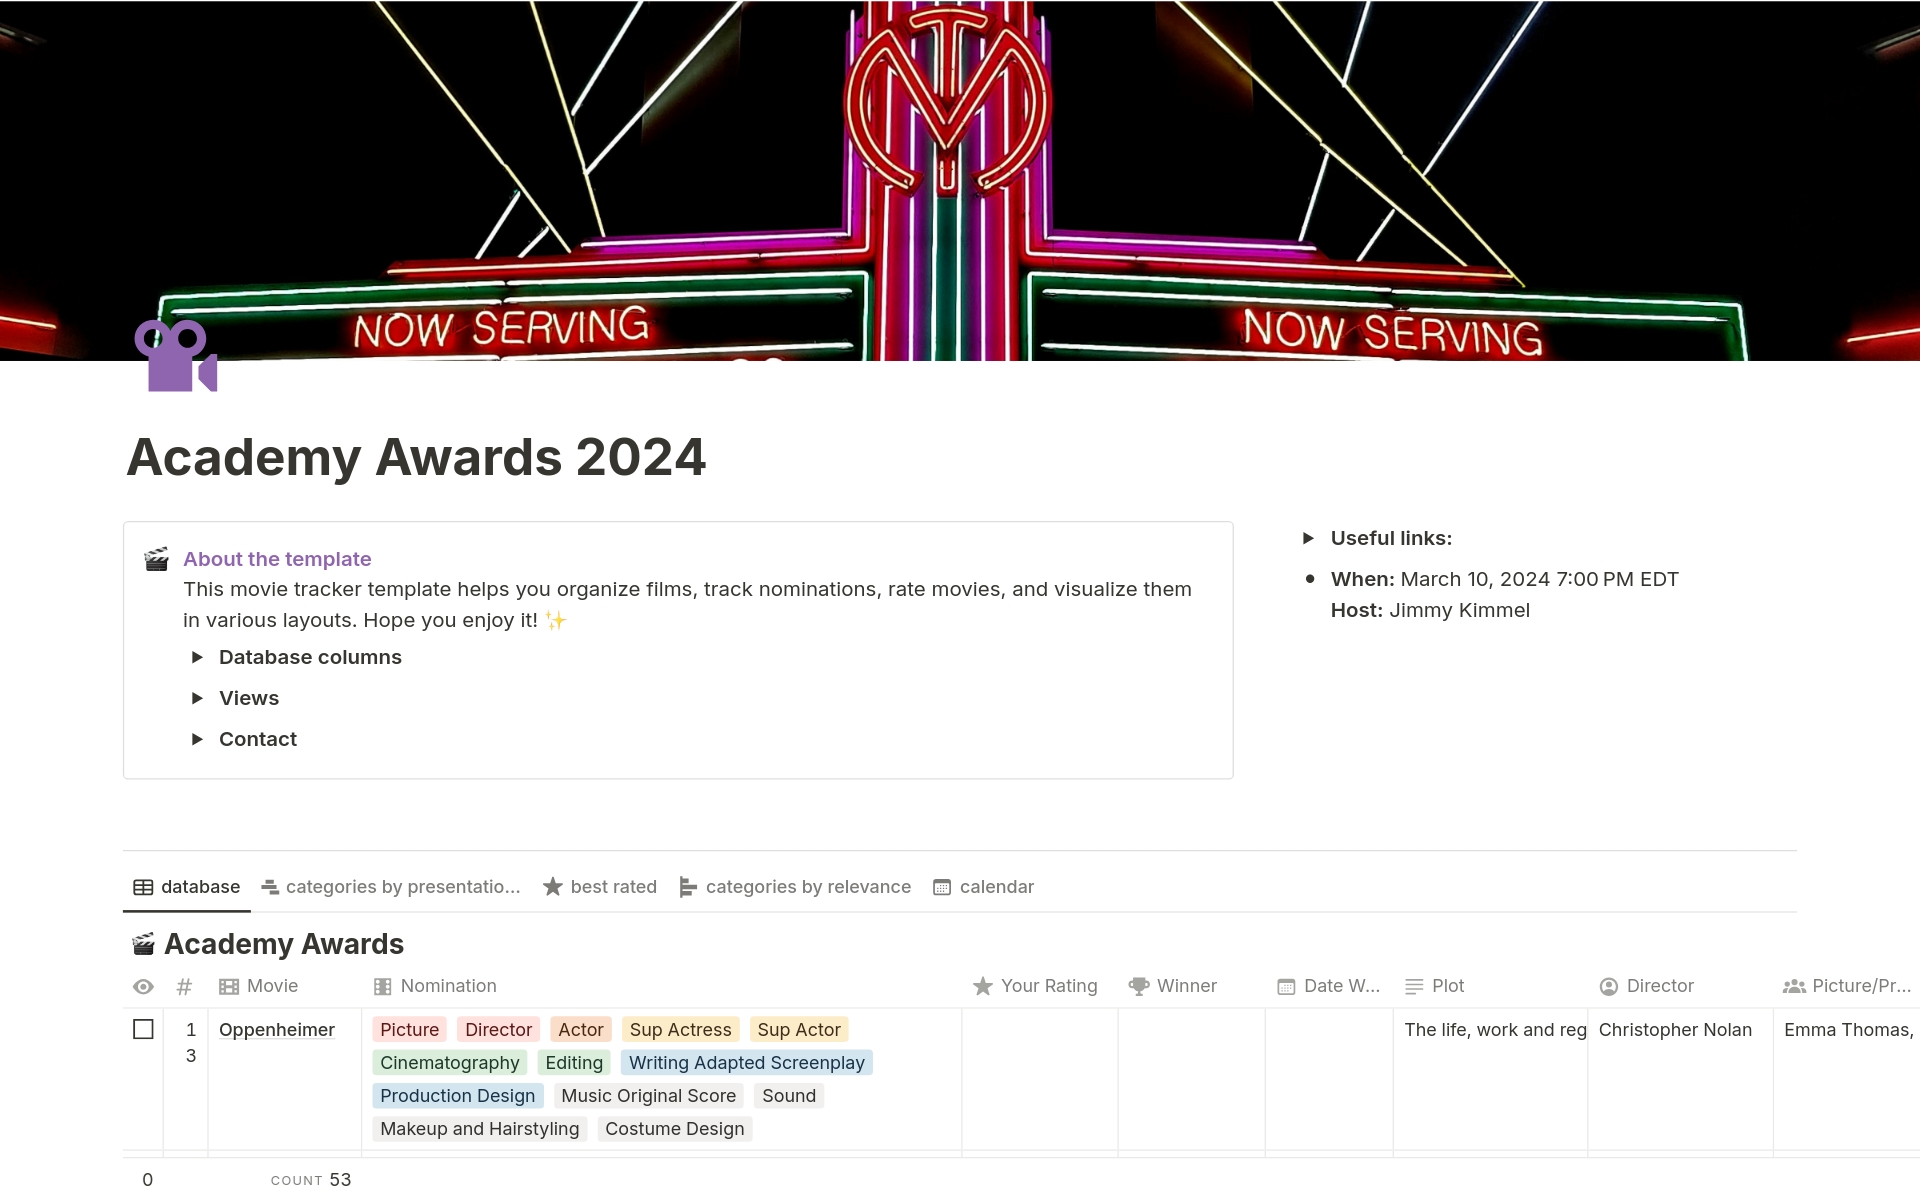 🎬 Organize and track your 2024 Academy Award journey!
This Notion template helps you to explore and track all nominated films and shorts.